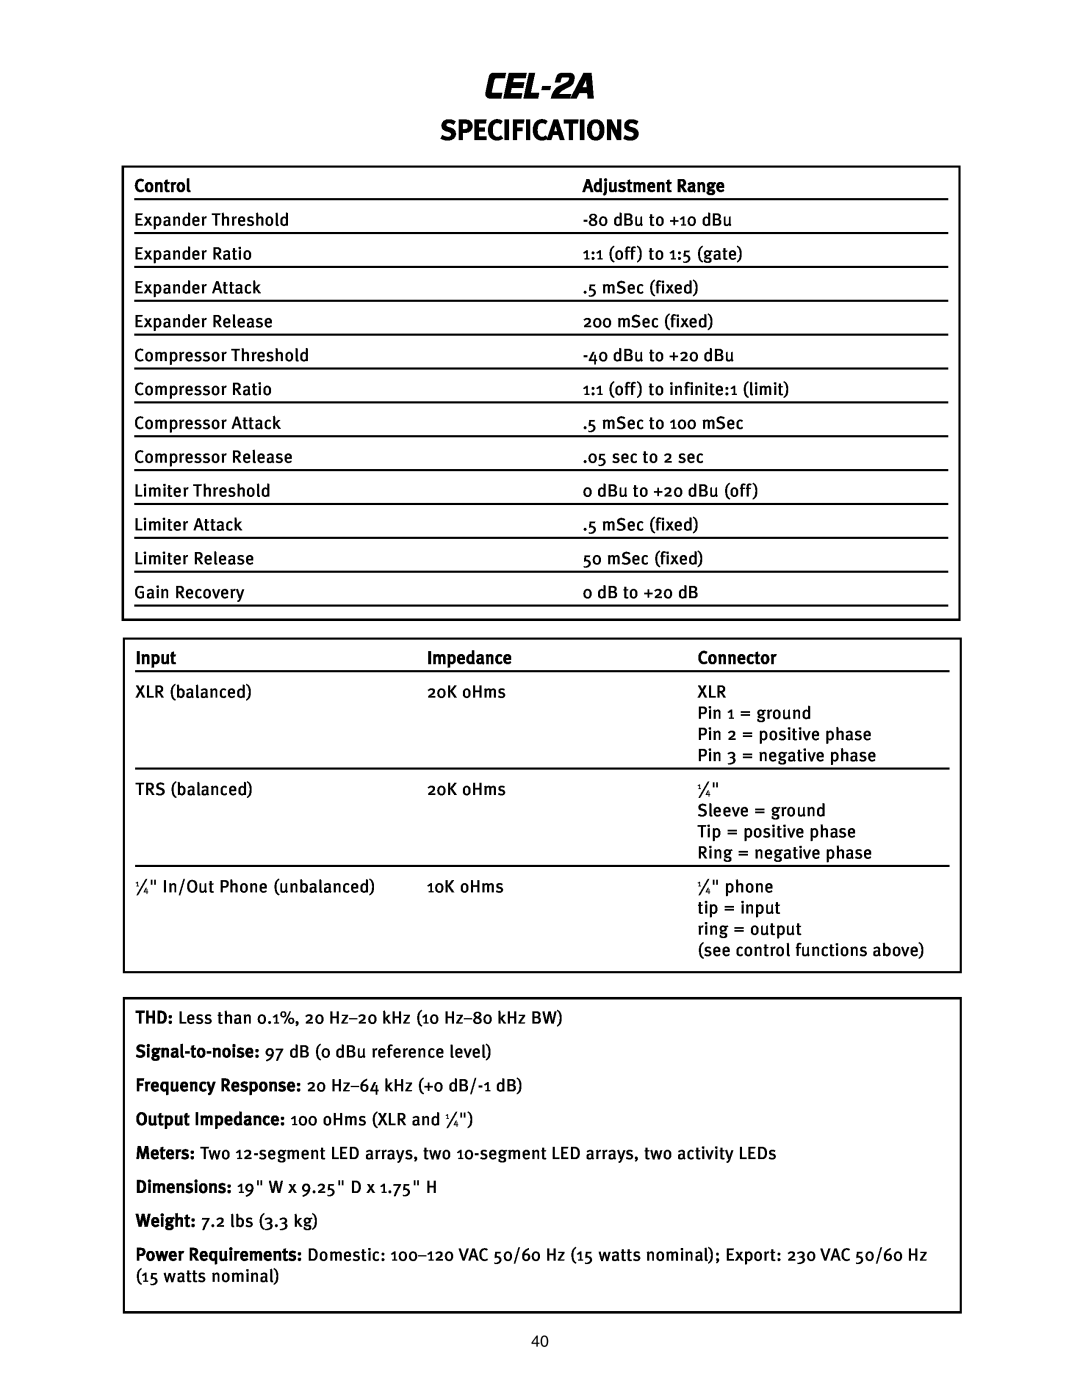 Peavey CEL-2A manual Specifications 